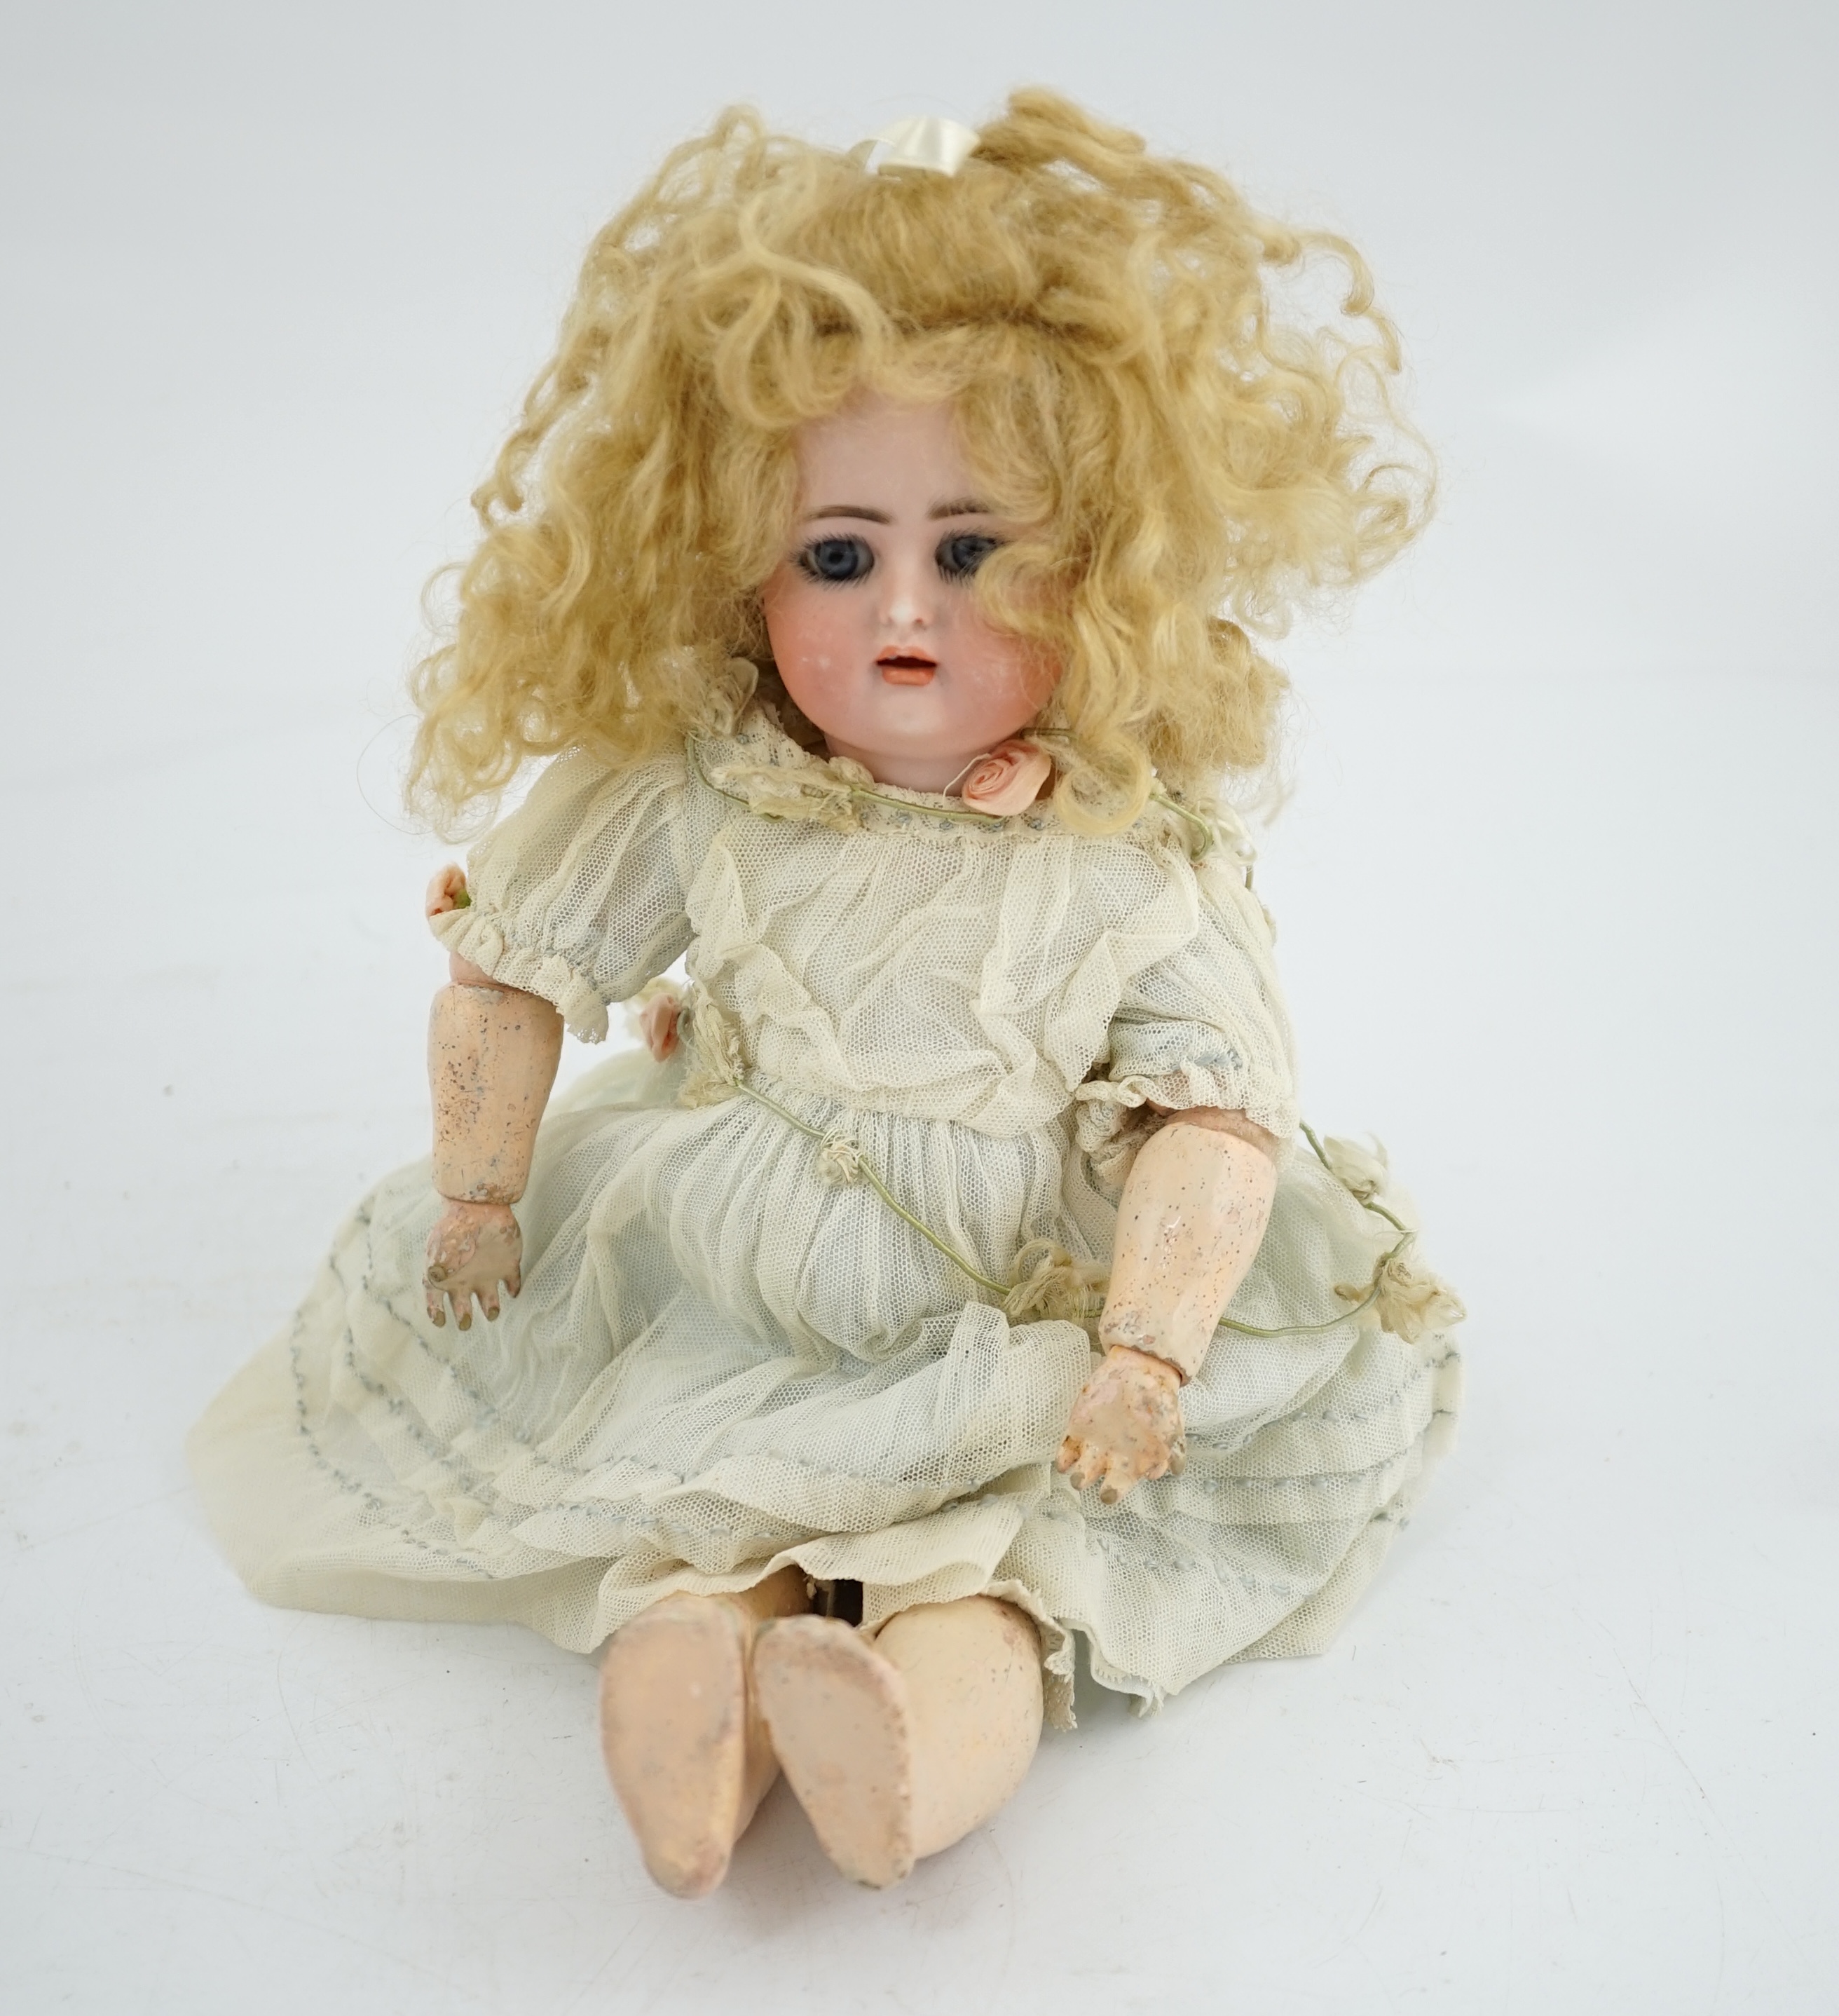 A Kammer & Reinhart / S & H bisque head doll, pierced ears, vintage clothes, one finger missing,